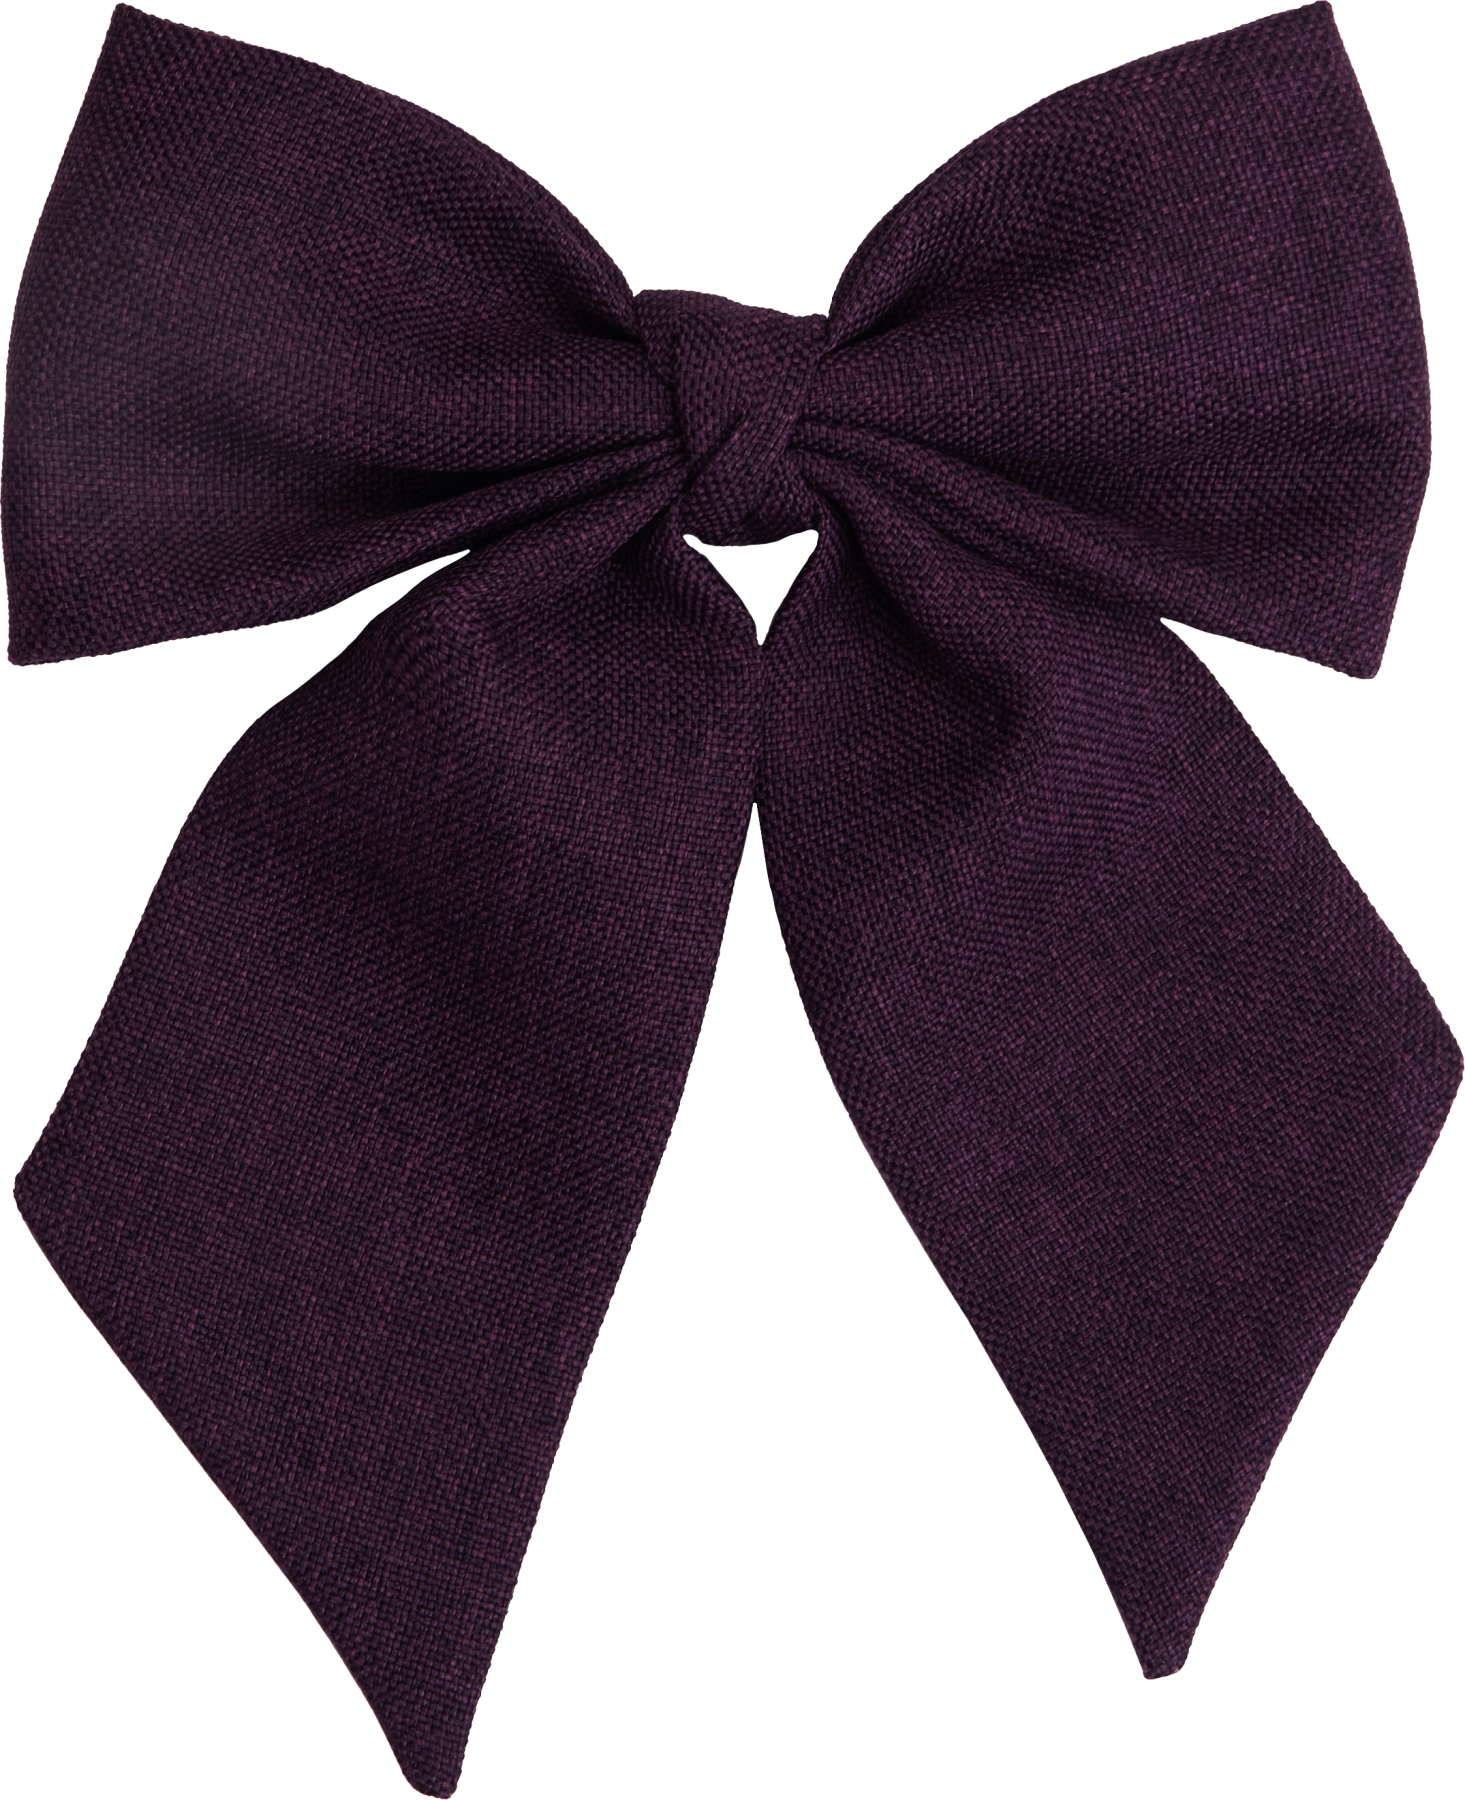 Bow of lilac hessian fabric